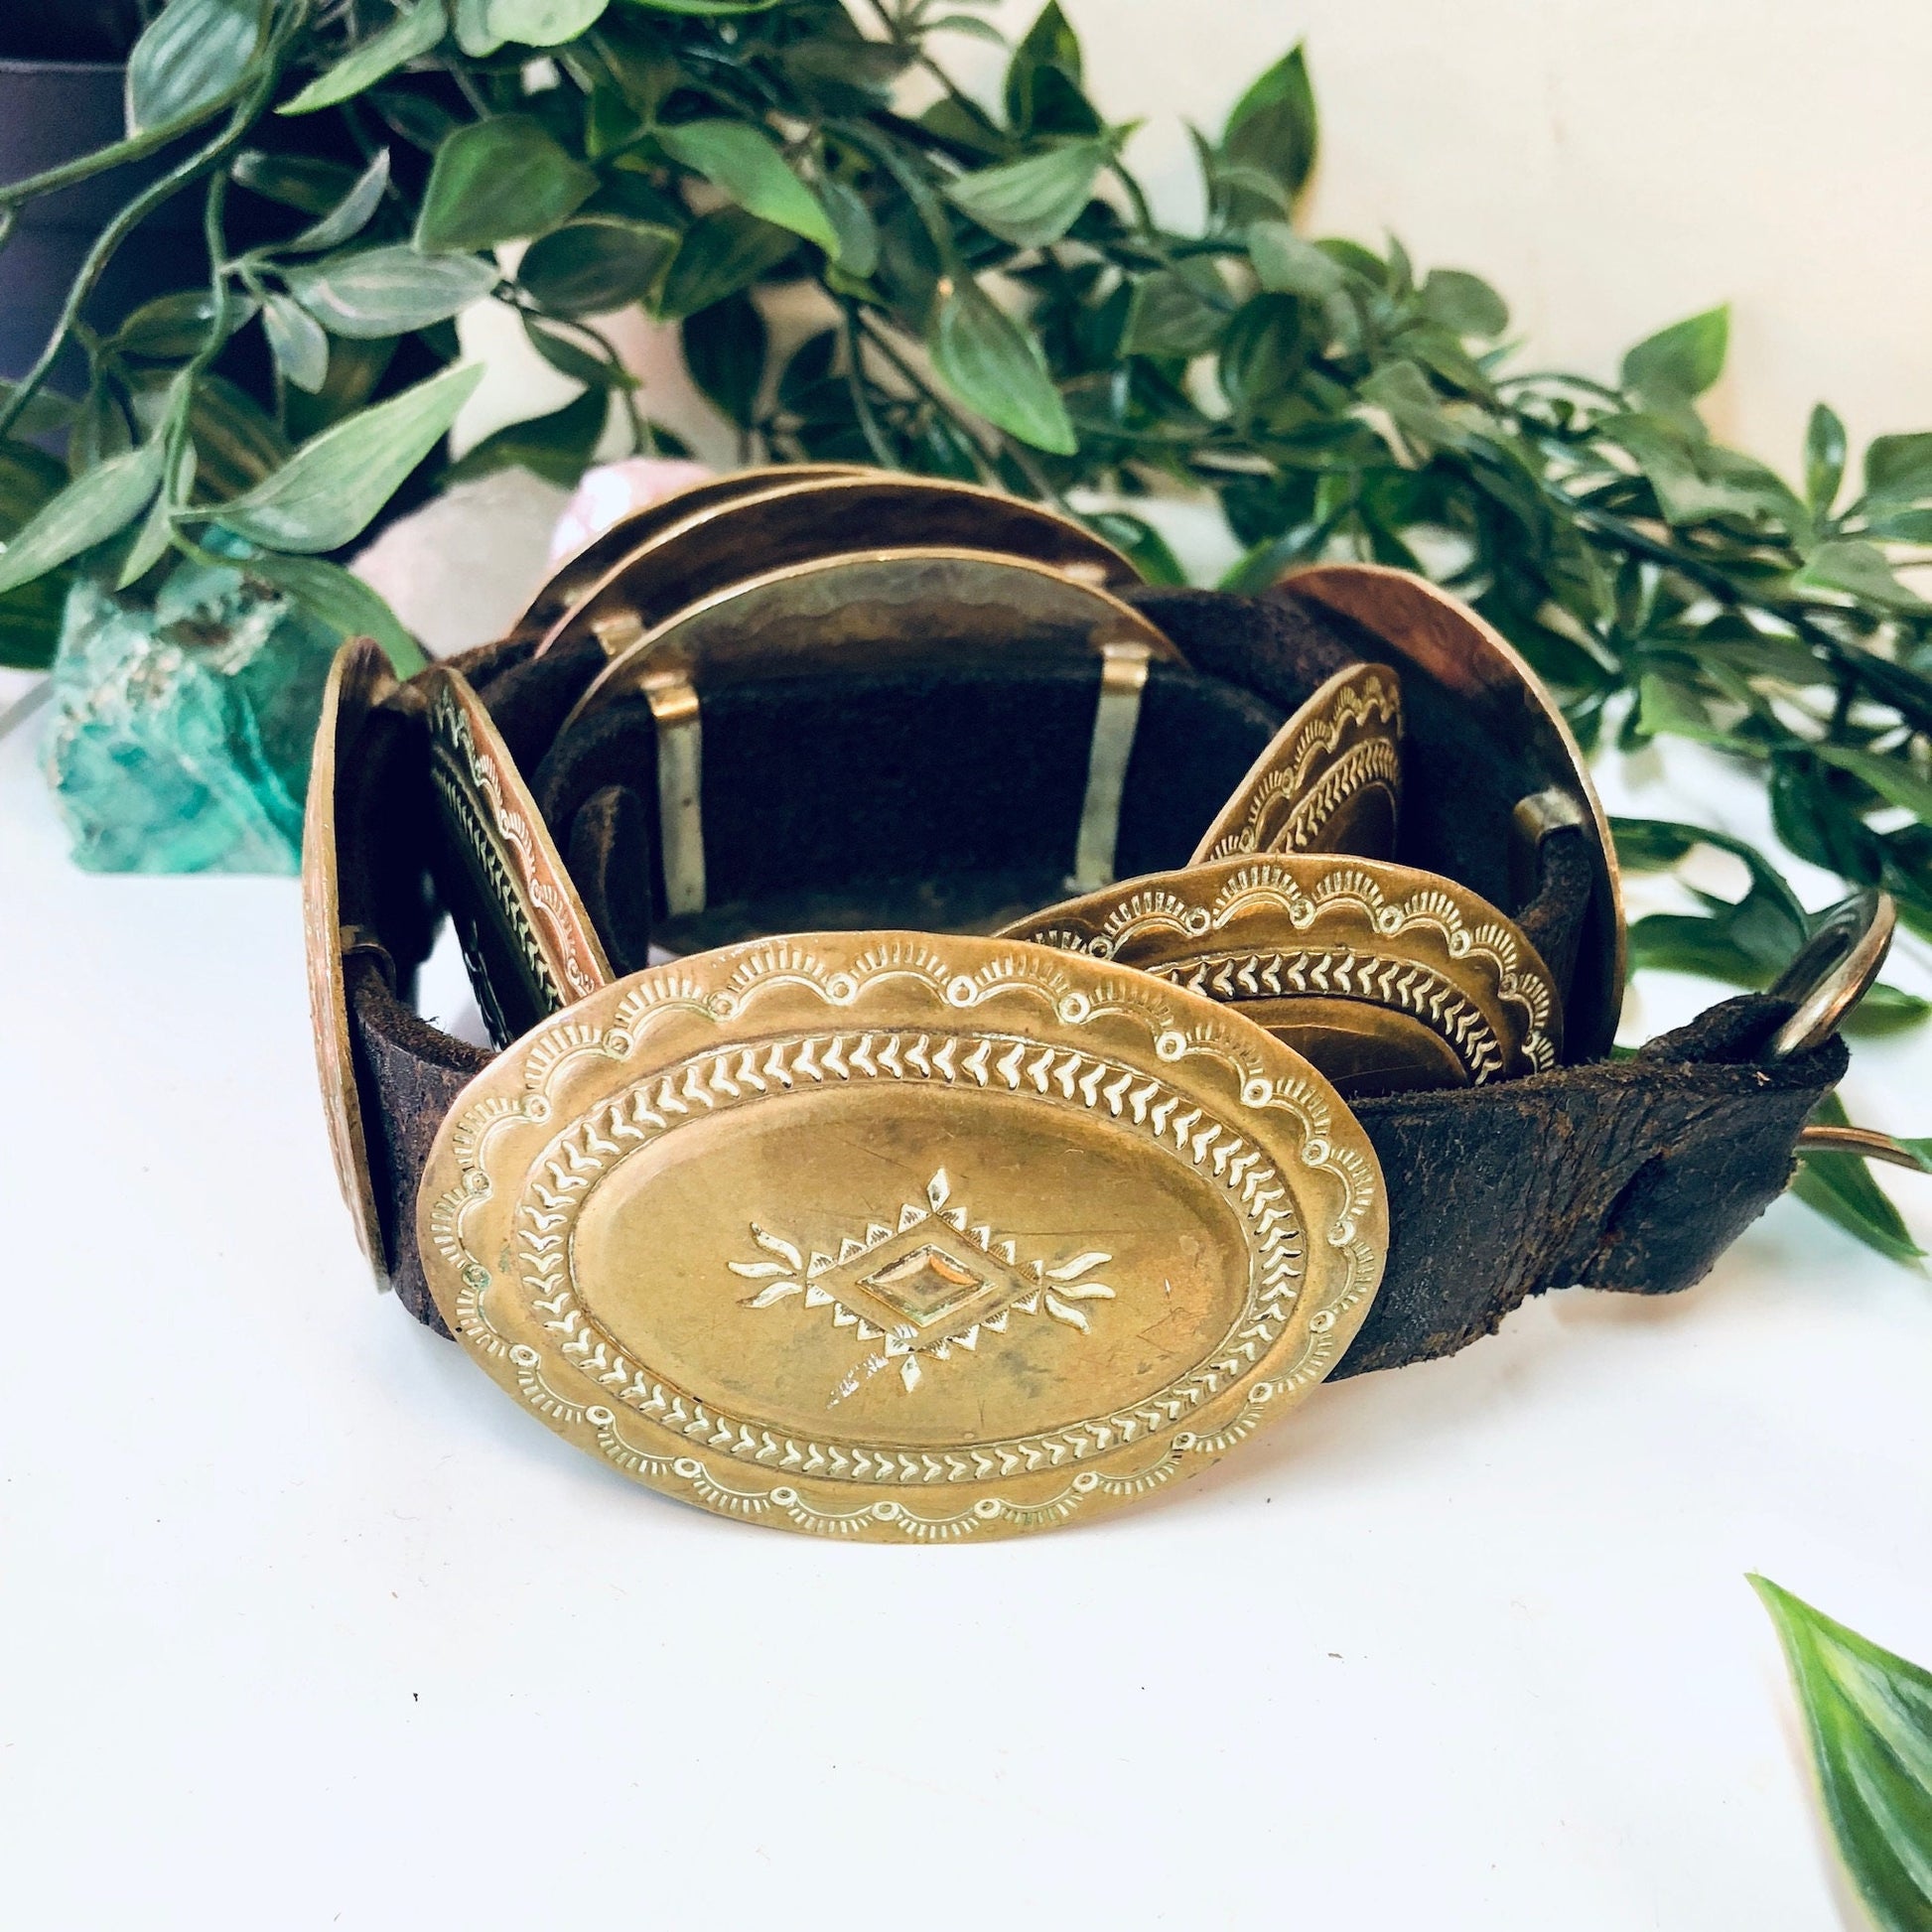 Vintage skinny concho belt made of brown leather with brass accents in a southwestern, hippie, bohemian style, displayed with green foliage.